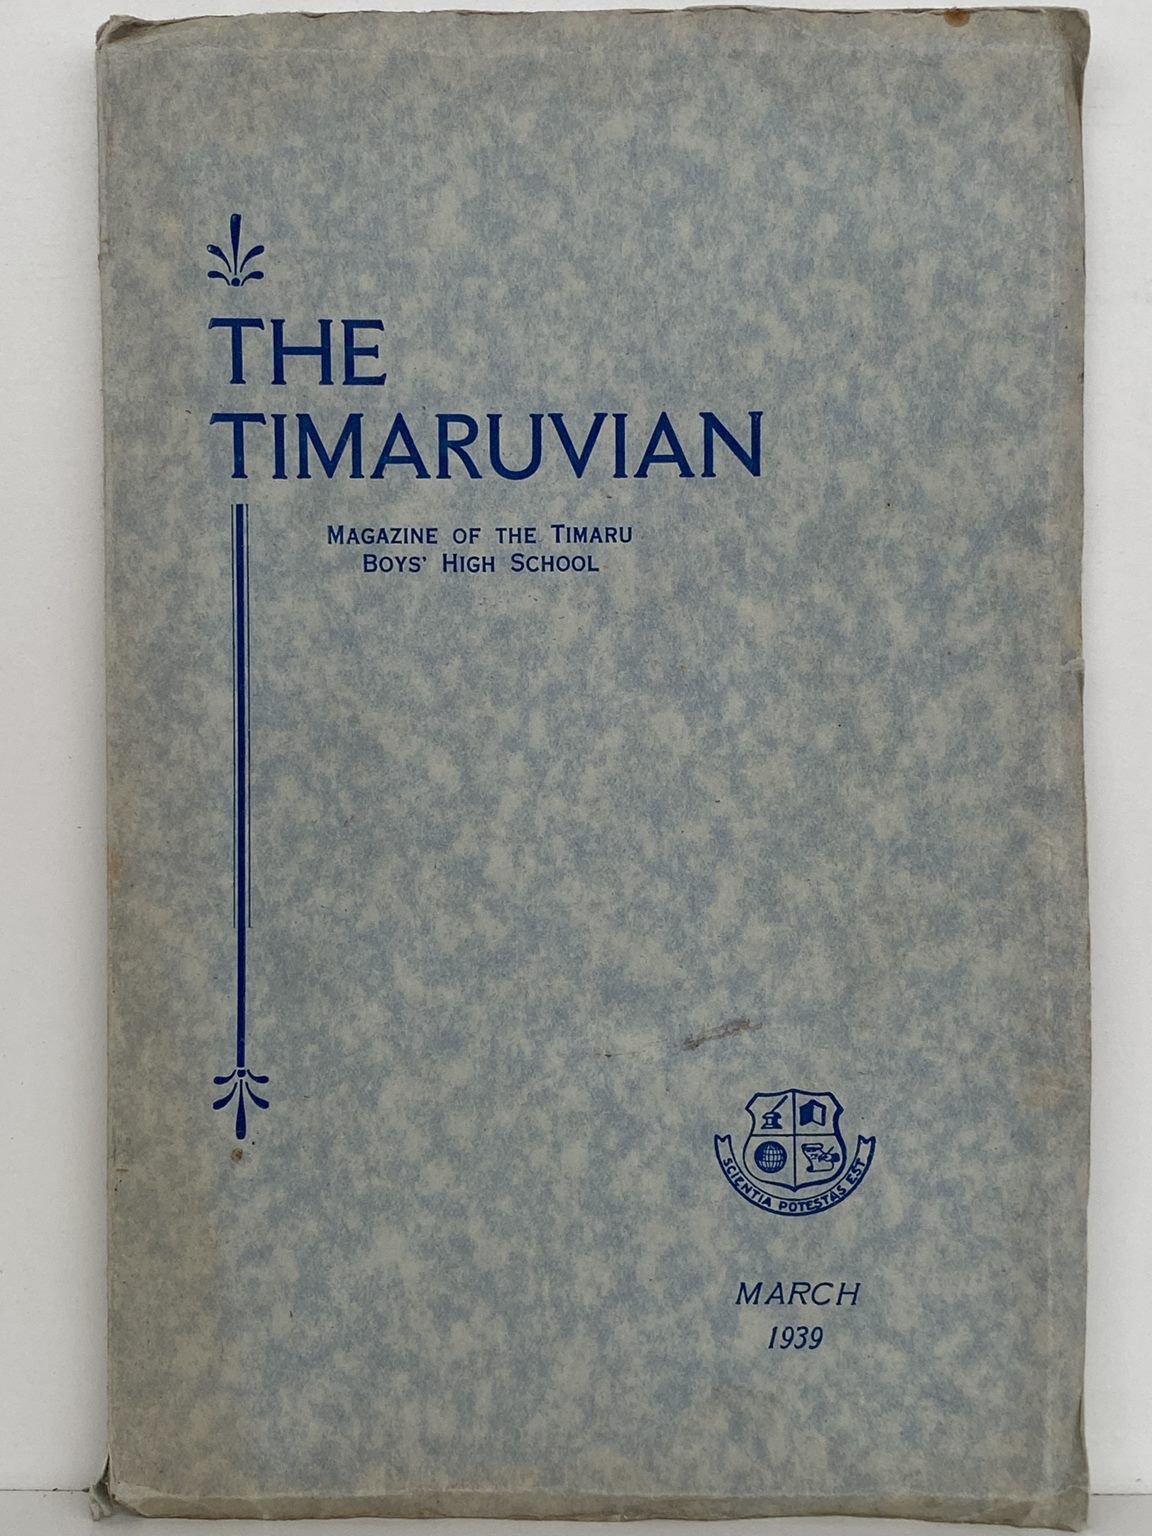 THE TIMARUVIAN: Magazine of the Timaru Boys' High School and its Old Boys' Association 1939